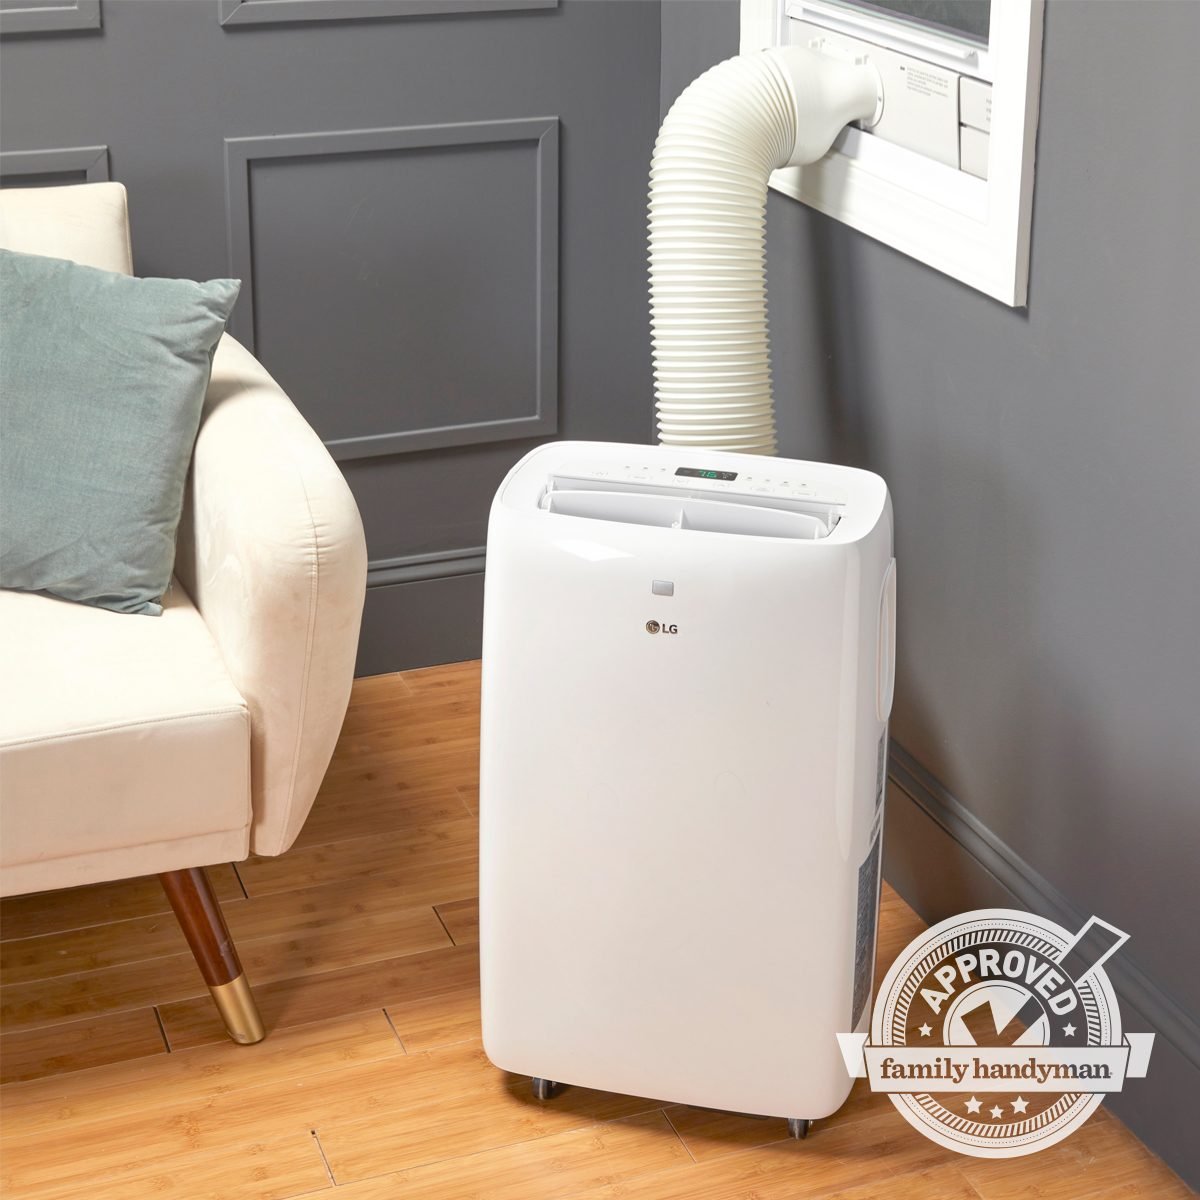 Portable LG AC Will Help You Get Through the Dog Days